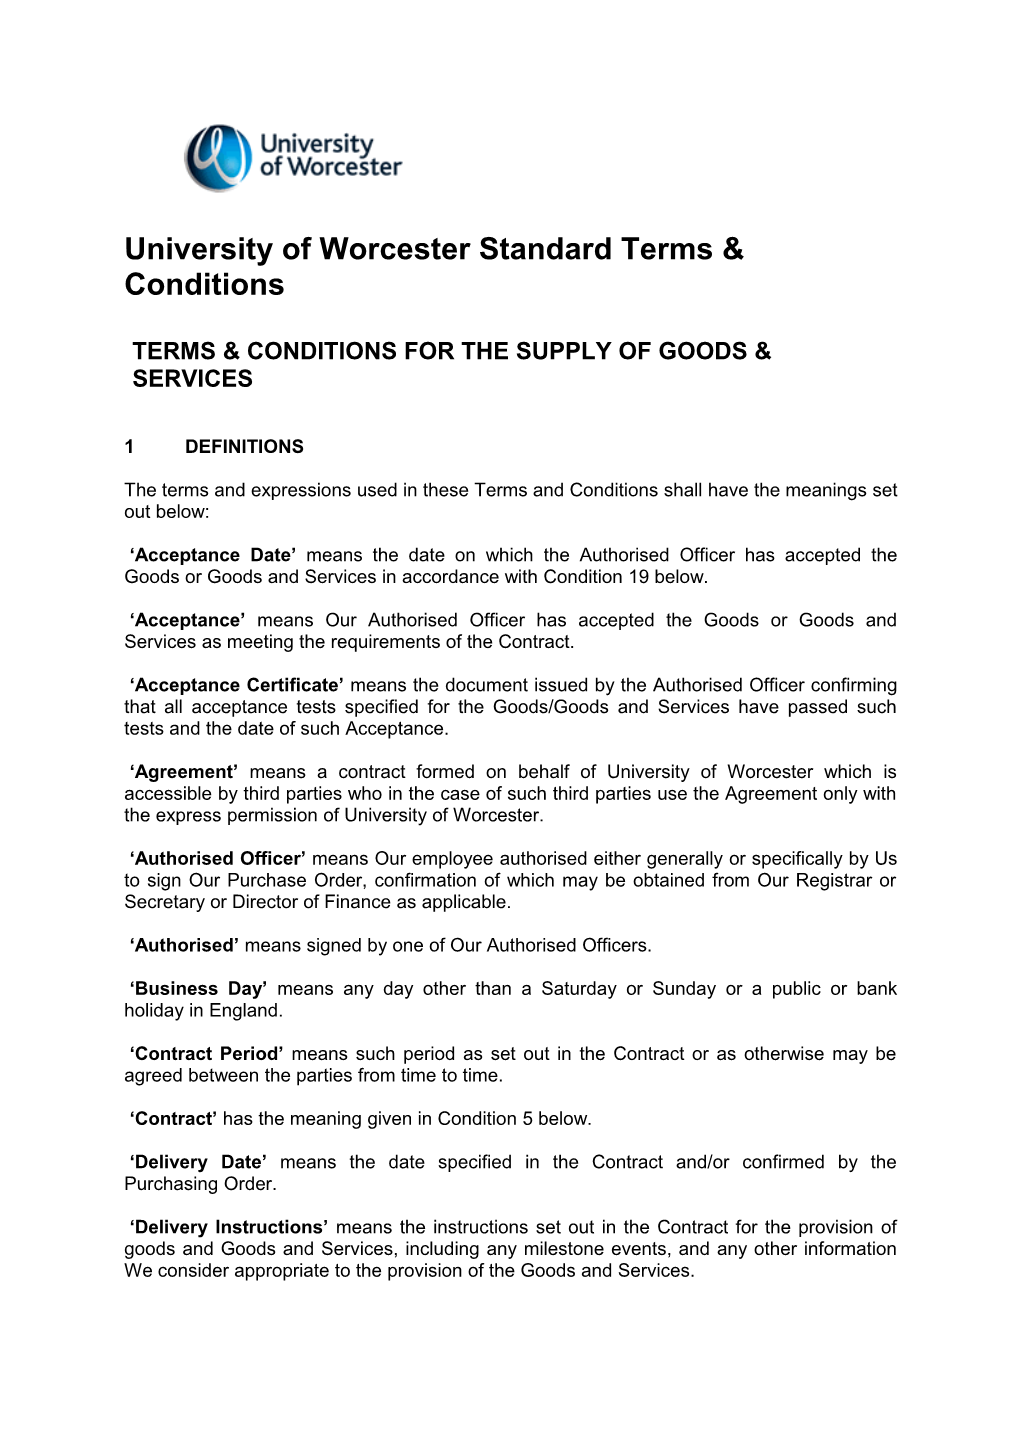 University of Worcester Standard Terms & Conditions